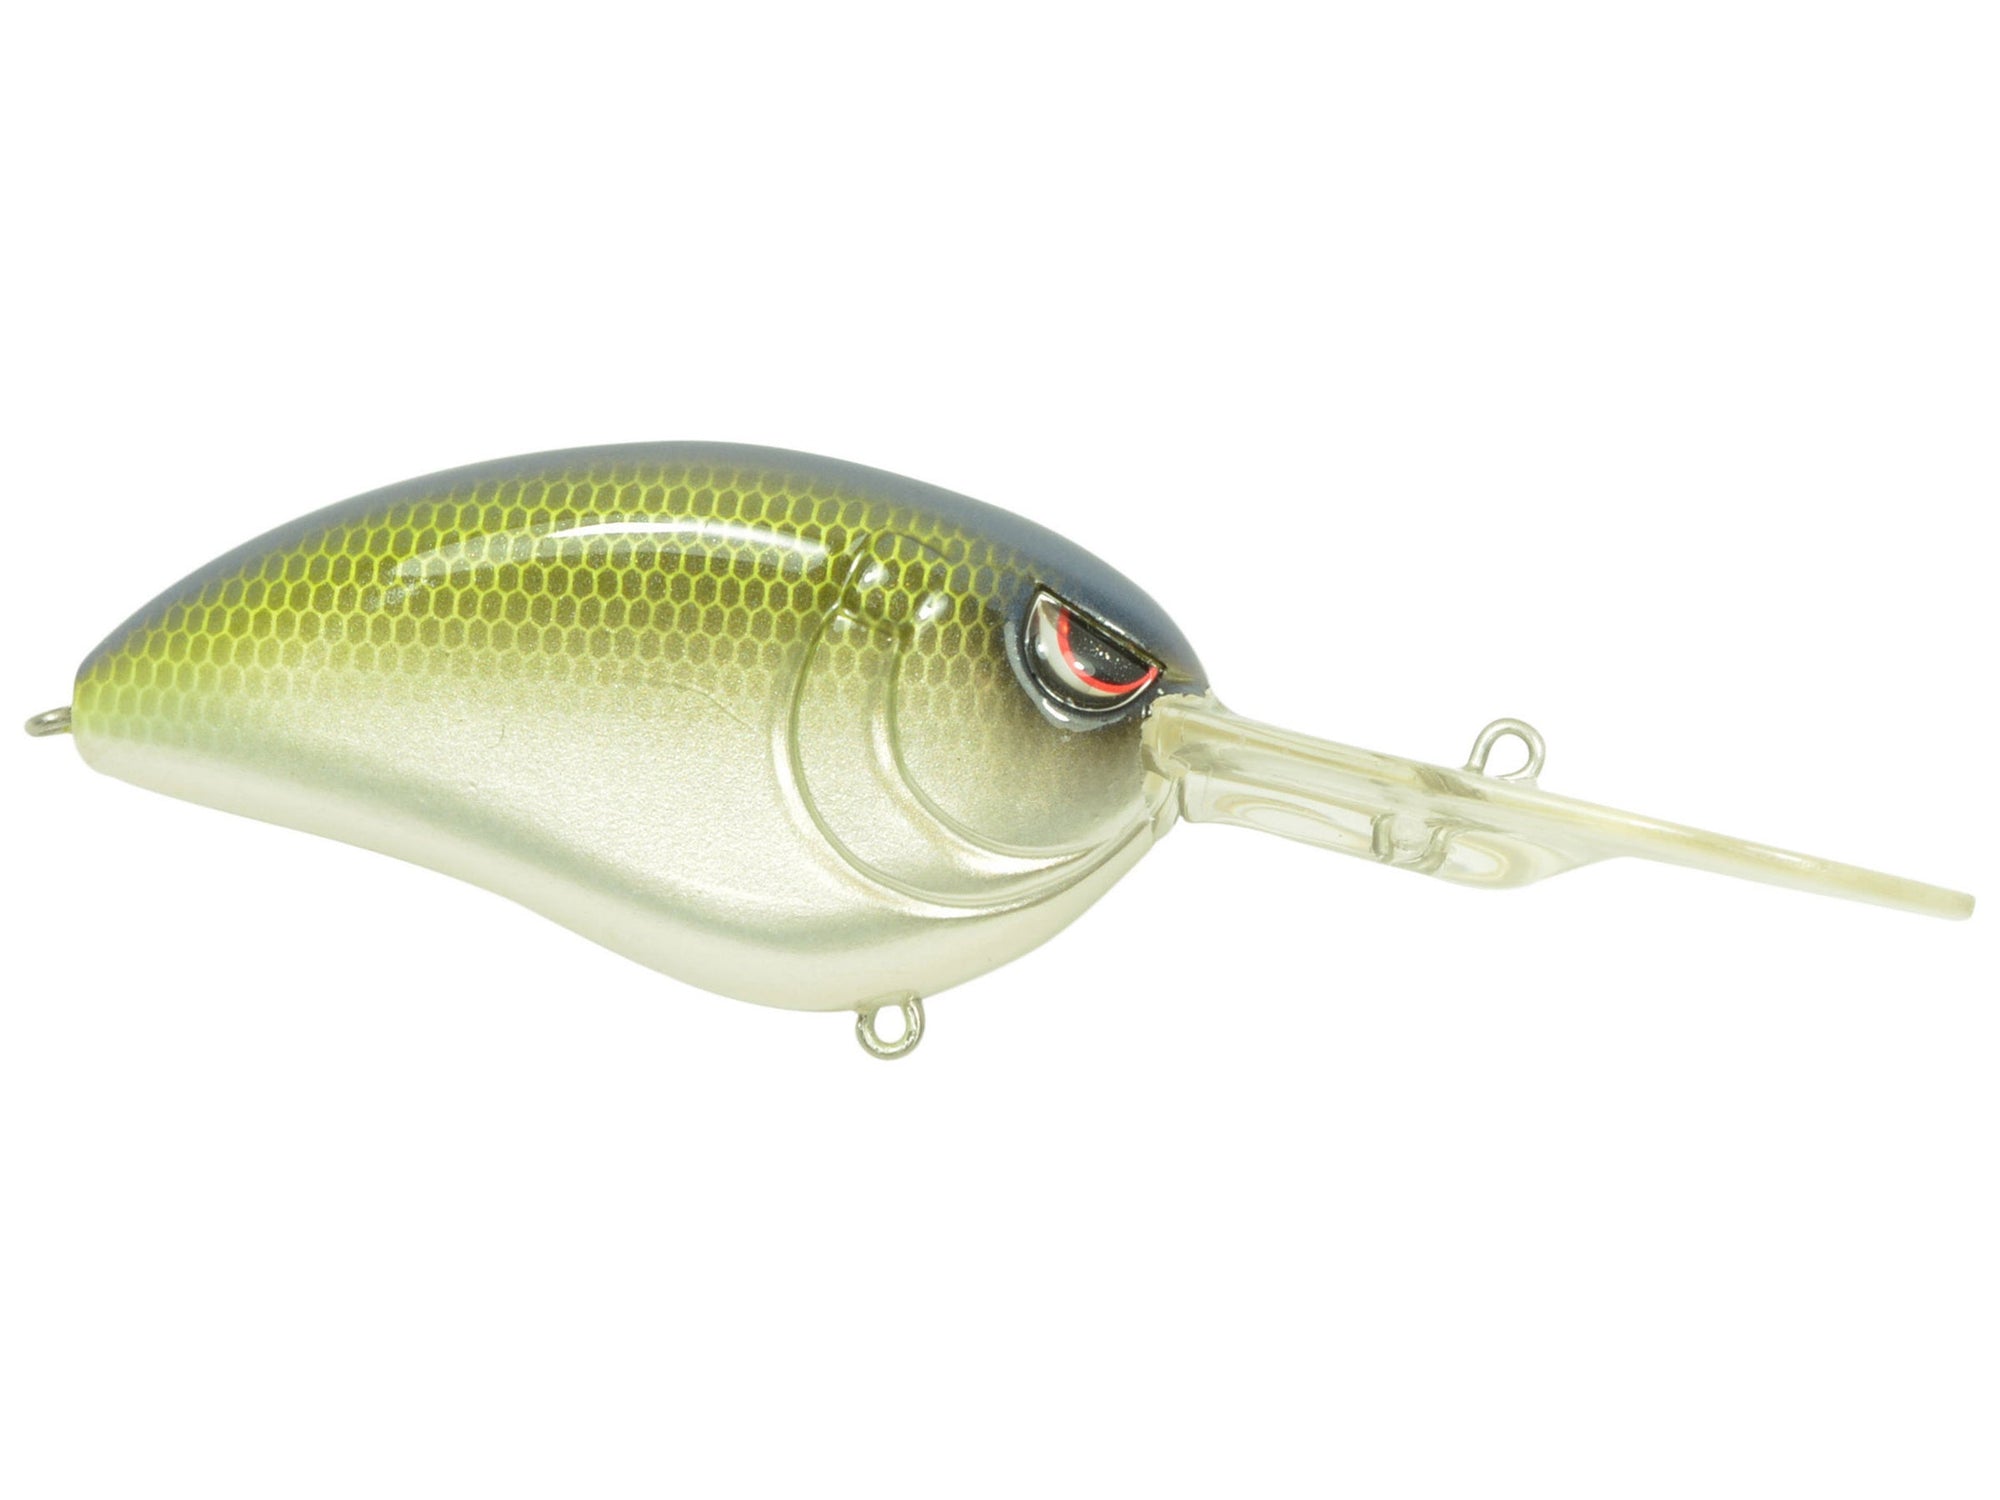 (2) Lucky Craft LV-300N 3 Sinking 3/4 Oz. Lipless Crankbaits Lime Chart New